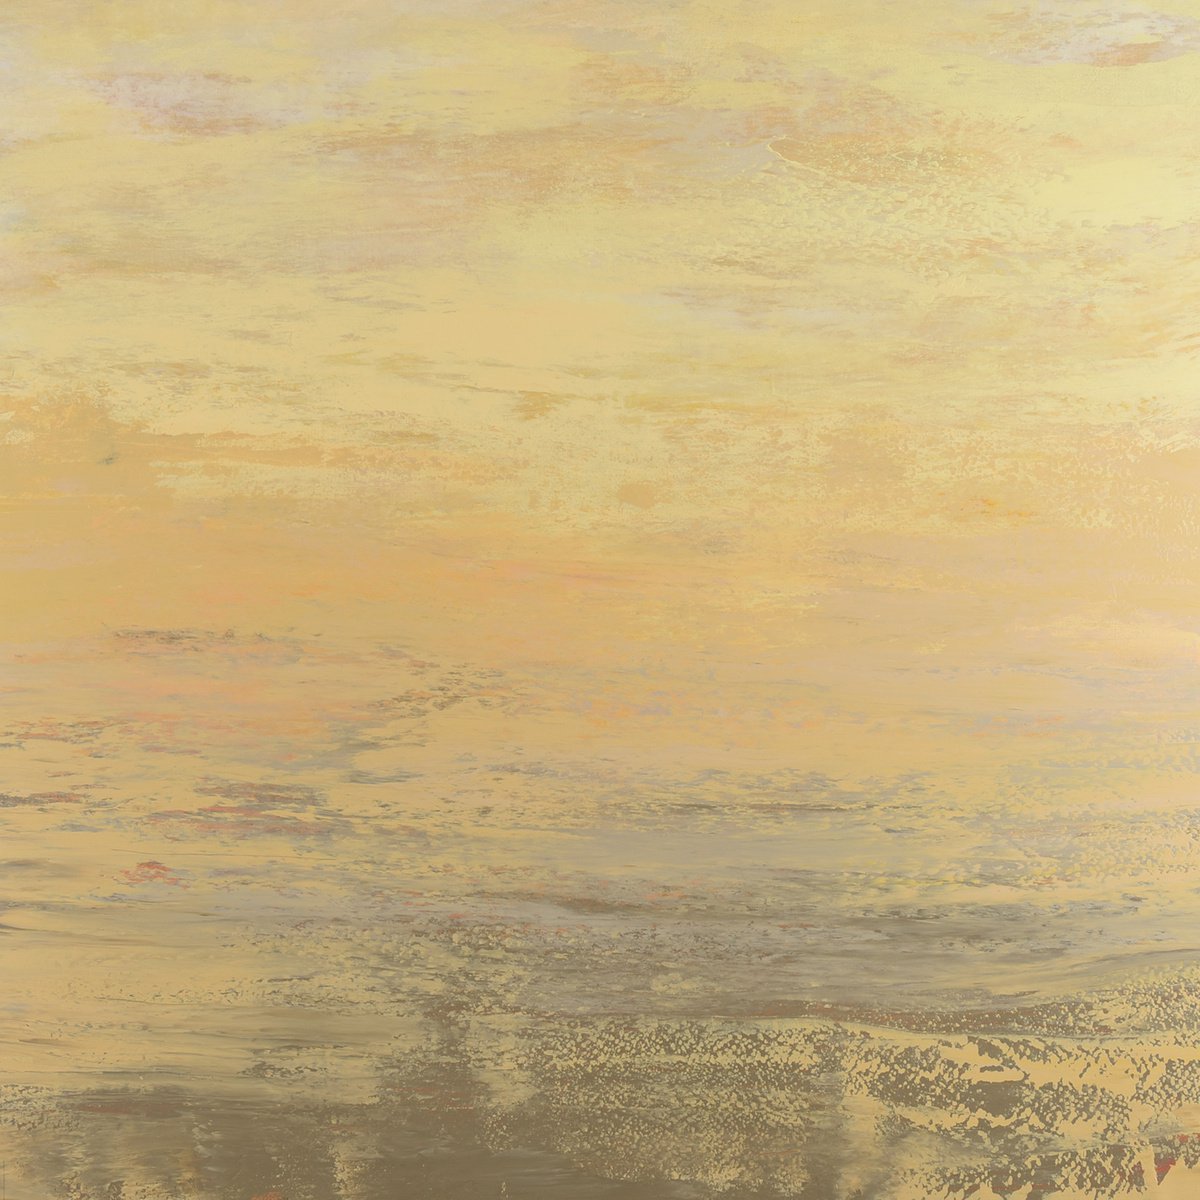 Softly - Modern Abstract Expressionist Seascape by Suzanne Vaughan